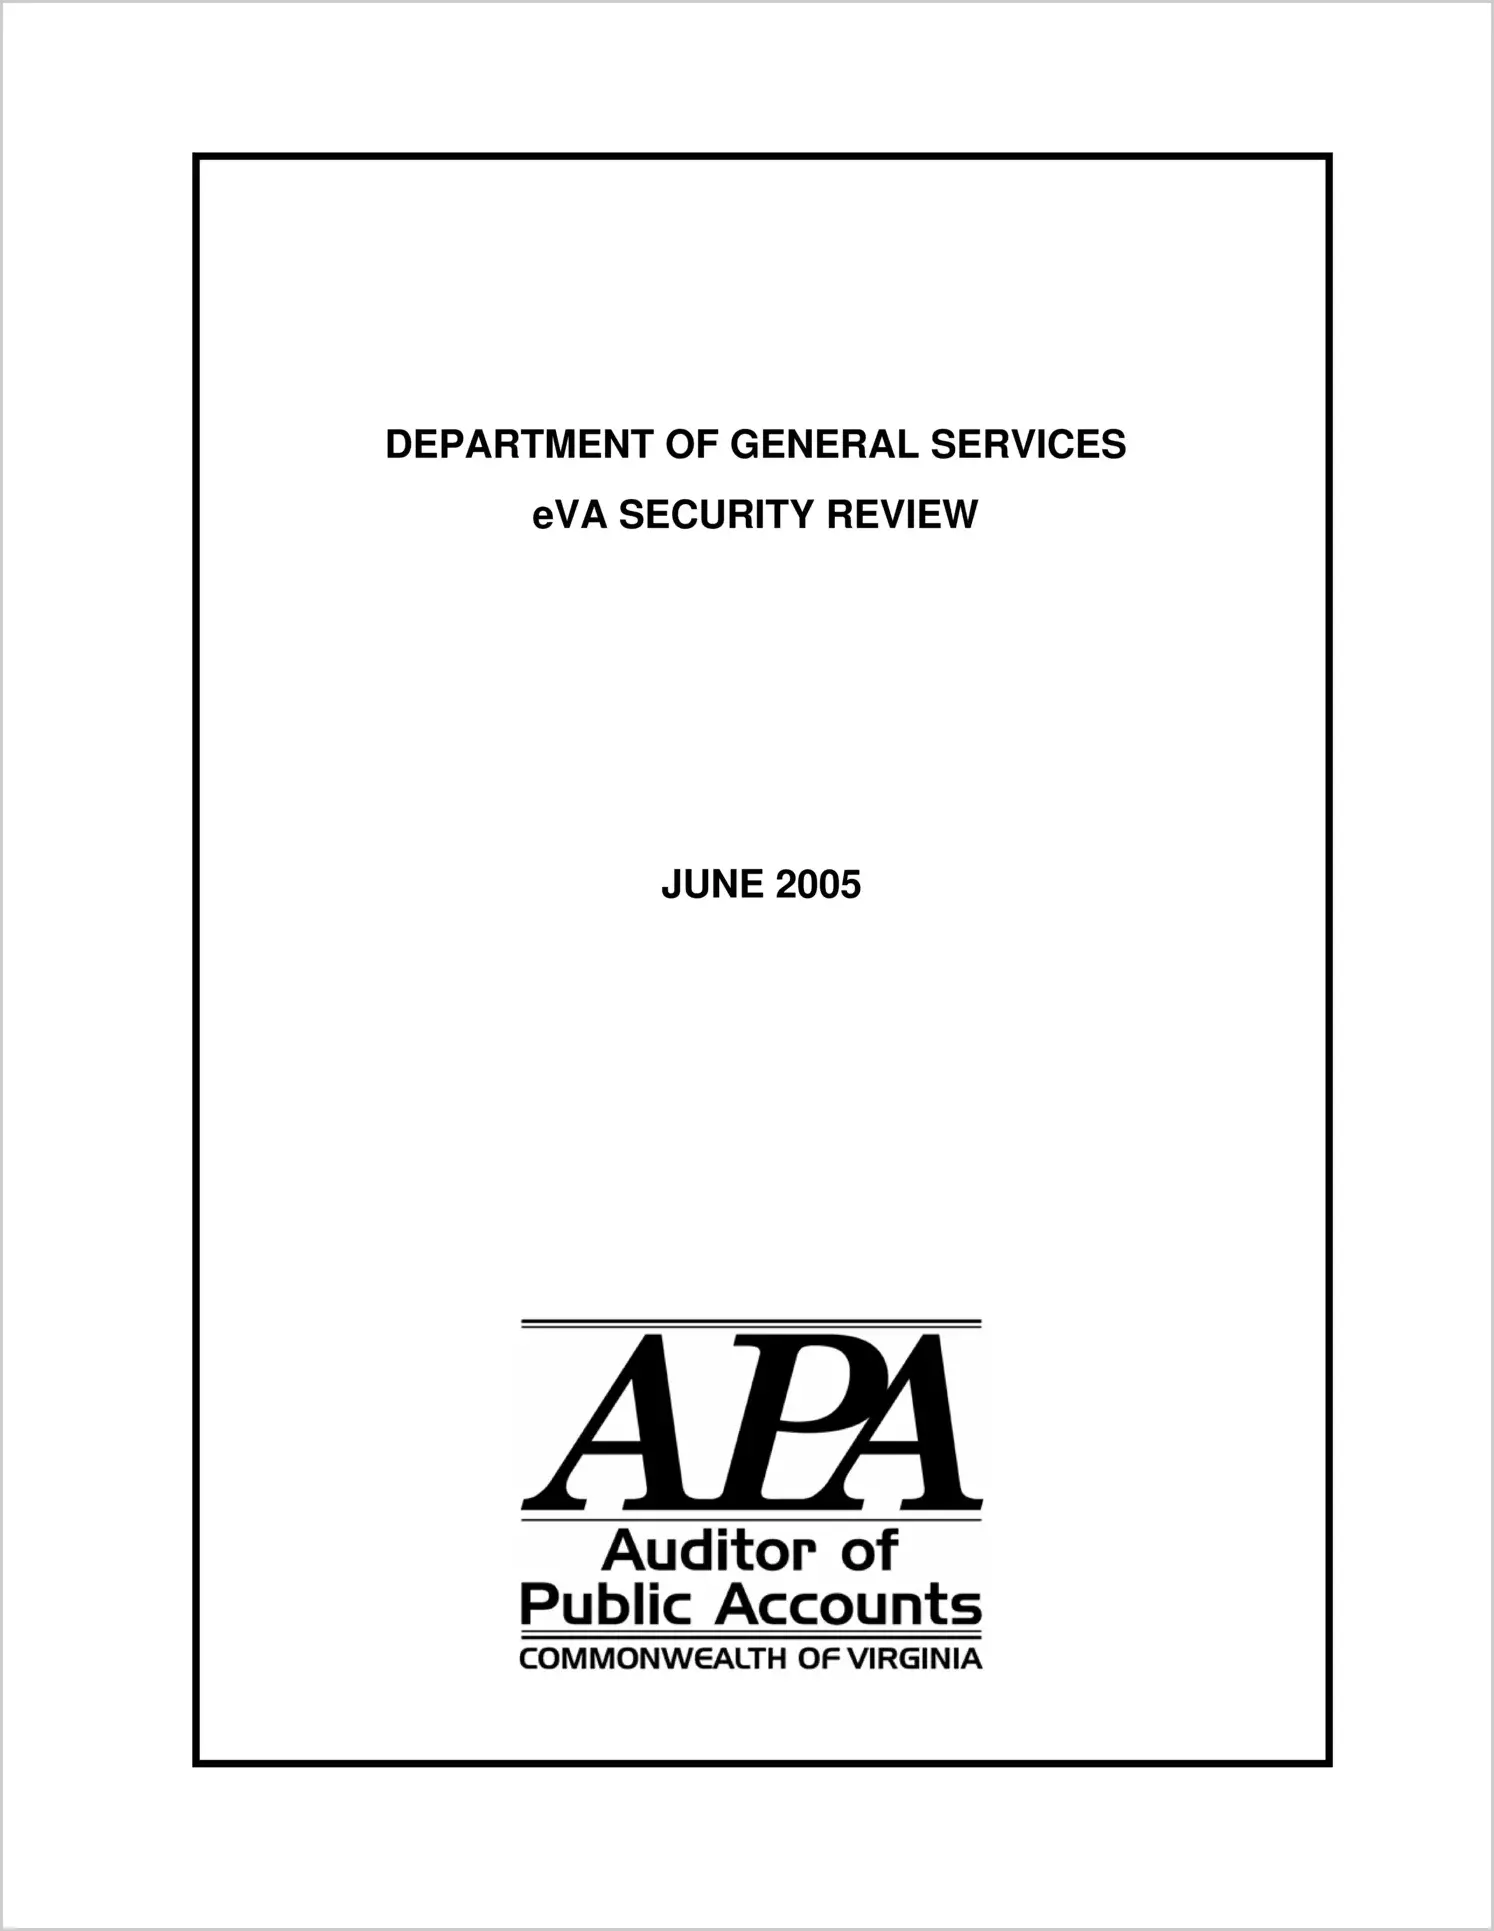 Department of General Services, eVA Security Review (Report Date: 6/2005)